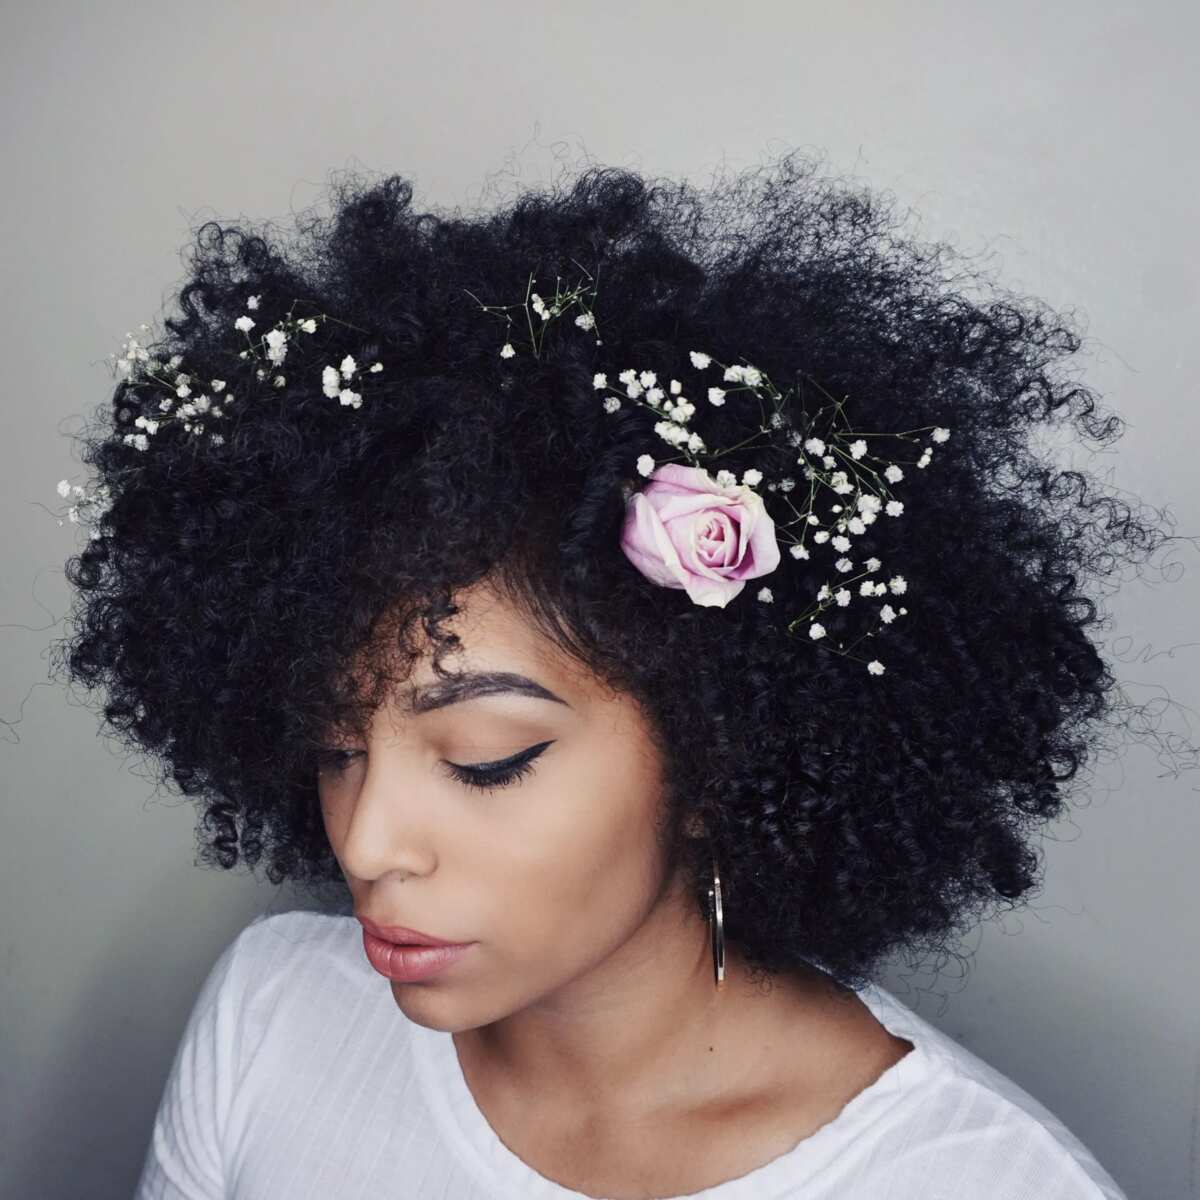 37 Wedding Hairstyles With Flowers That Will Stay Put